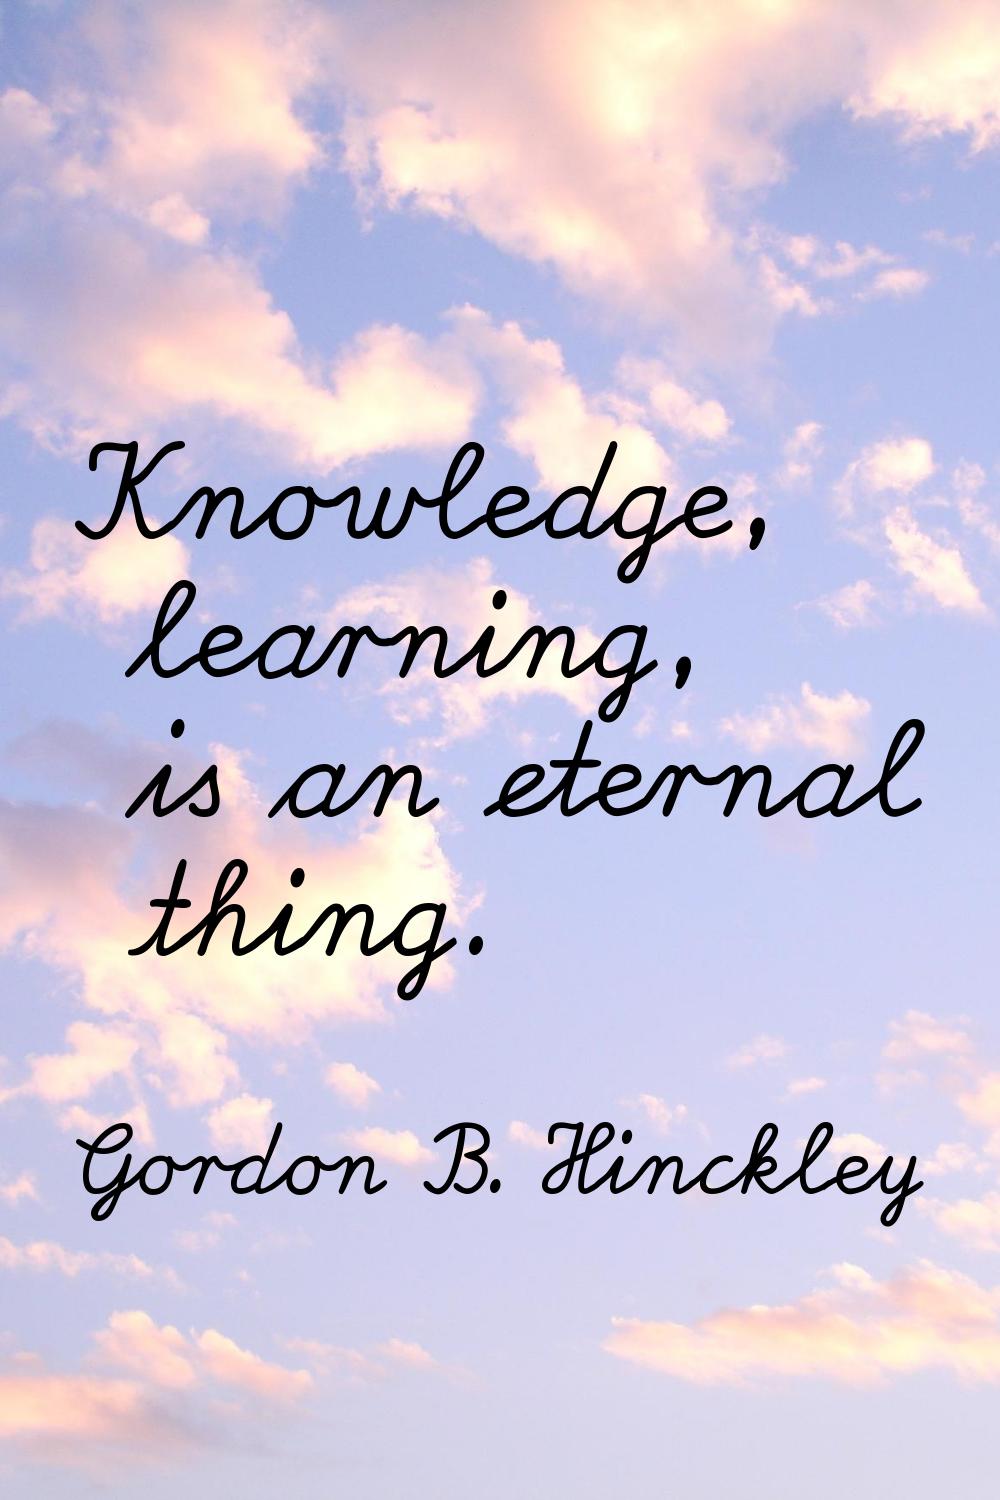 Knowledge, learning, is an eternal thing.